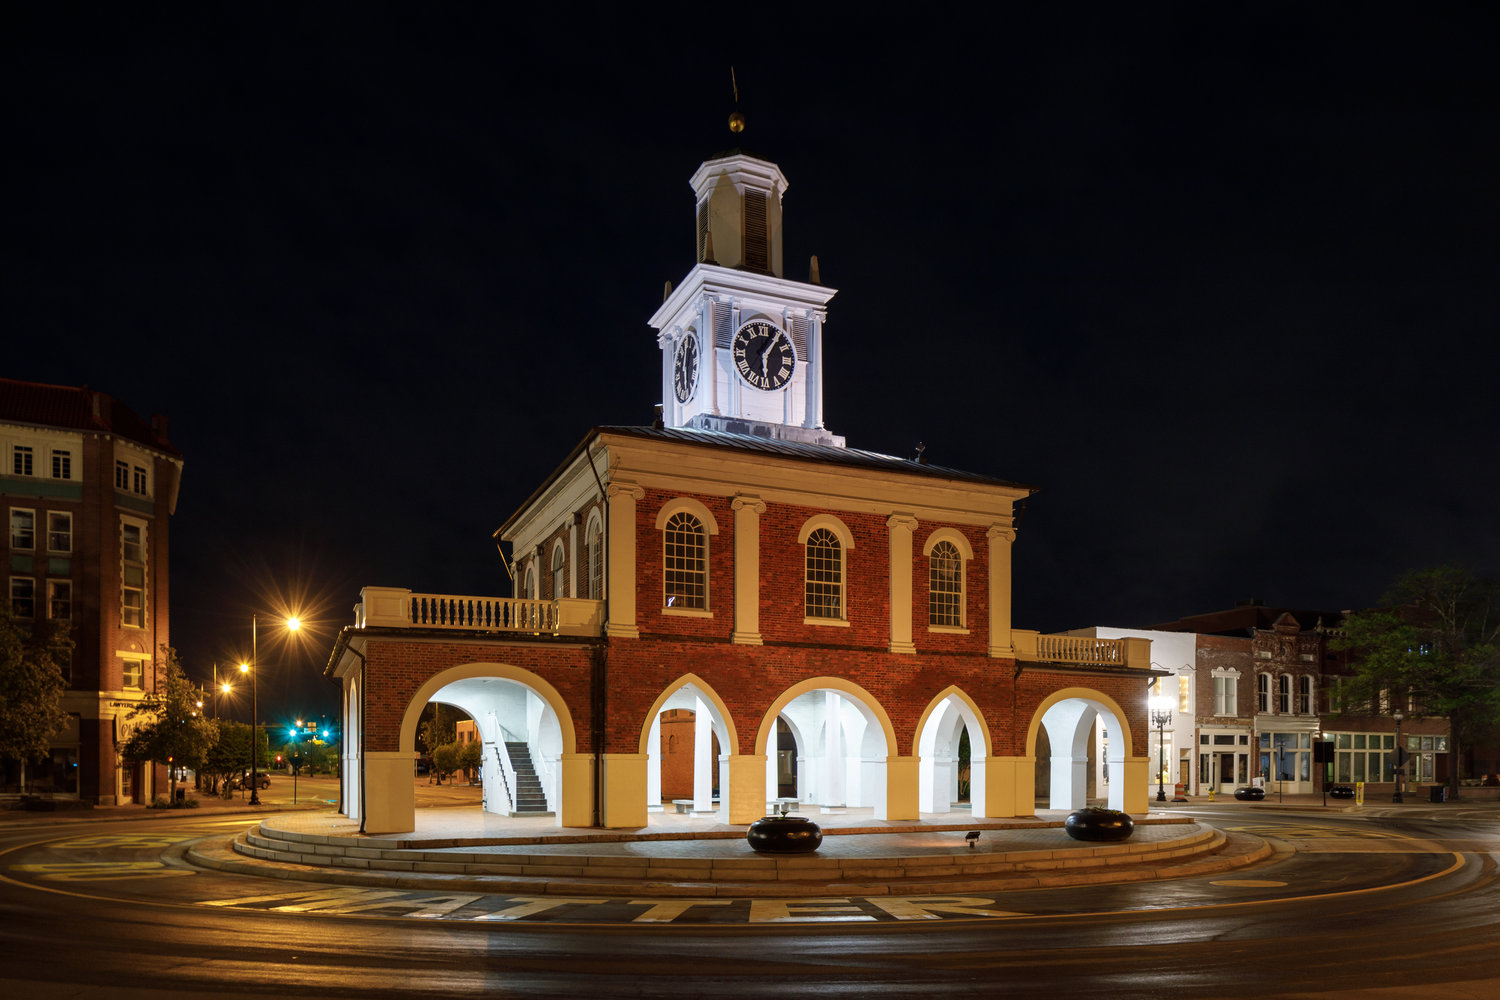 The public will have an opportunity to weigh in on the repurposing of the Market House during two meetings Thursday at the Kiwanis Recreation Center.